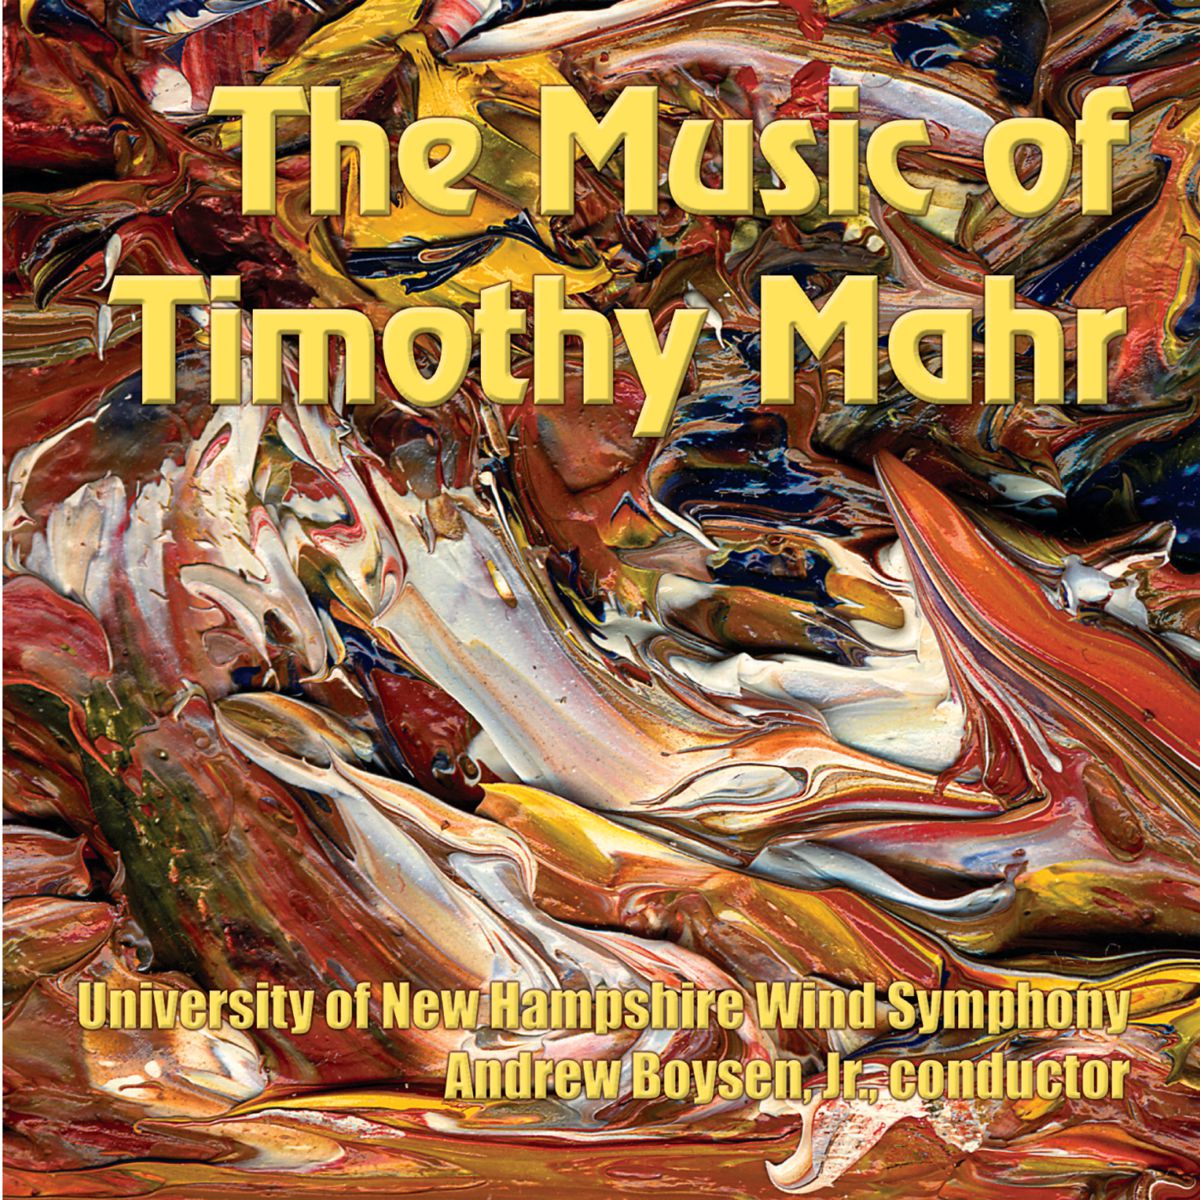 Music of Timothy Mahr, The - click here